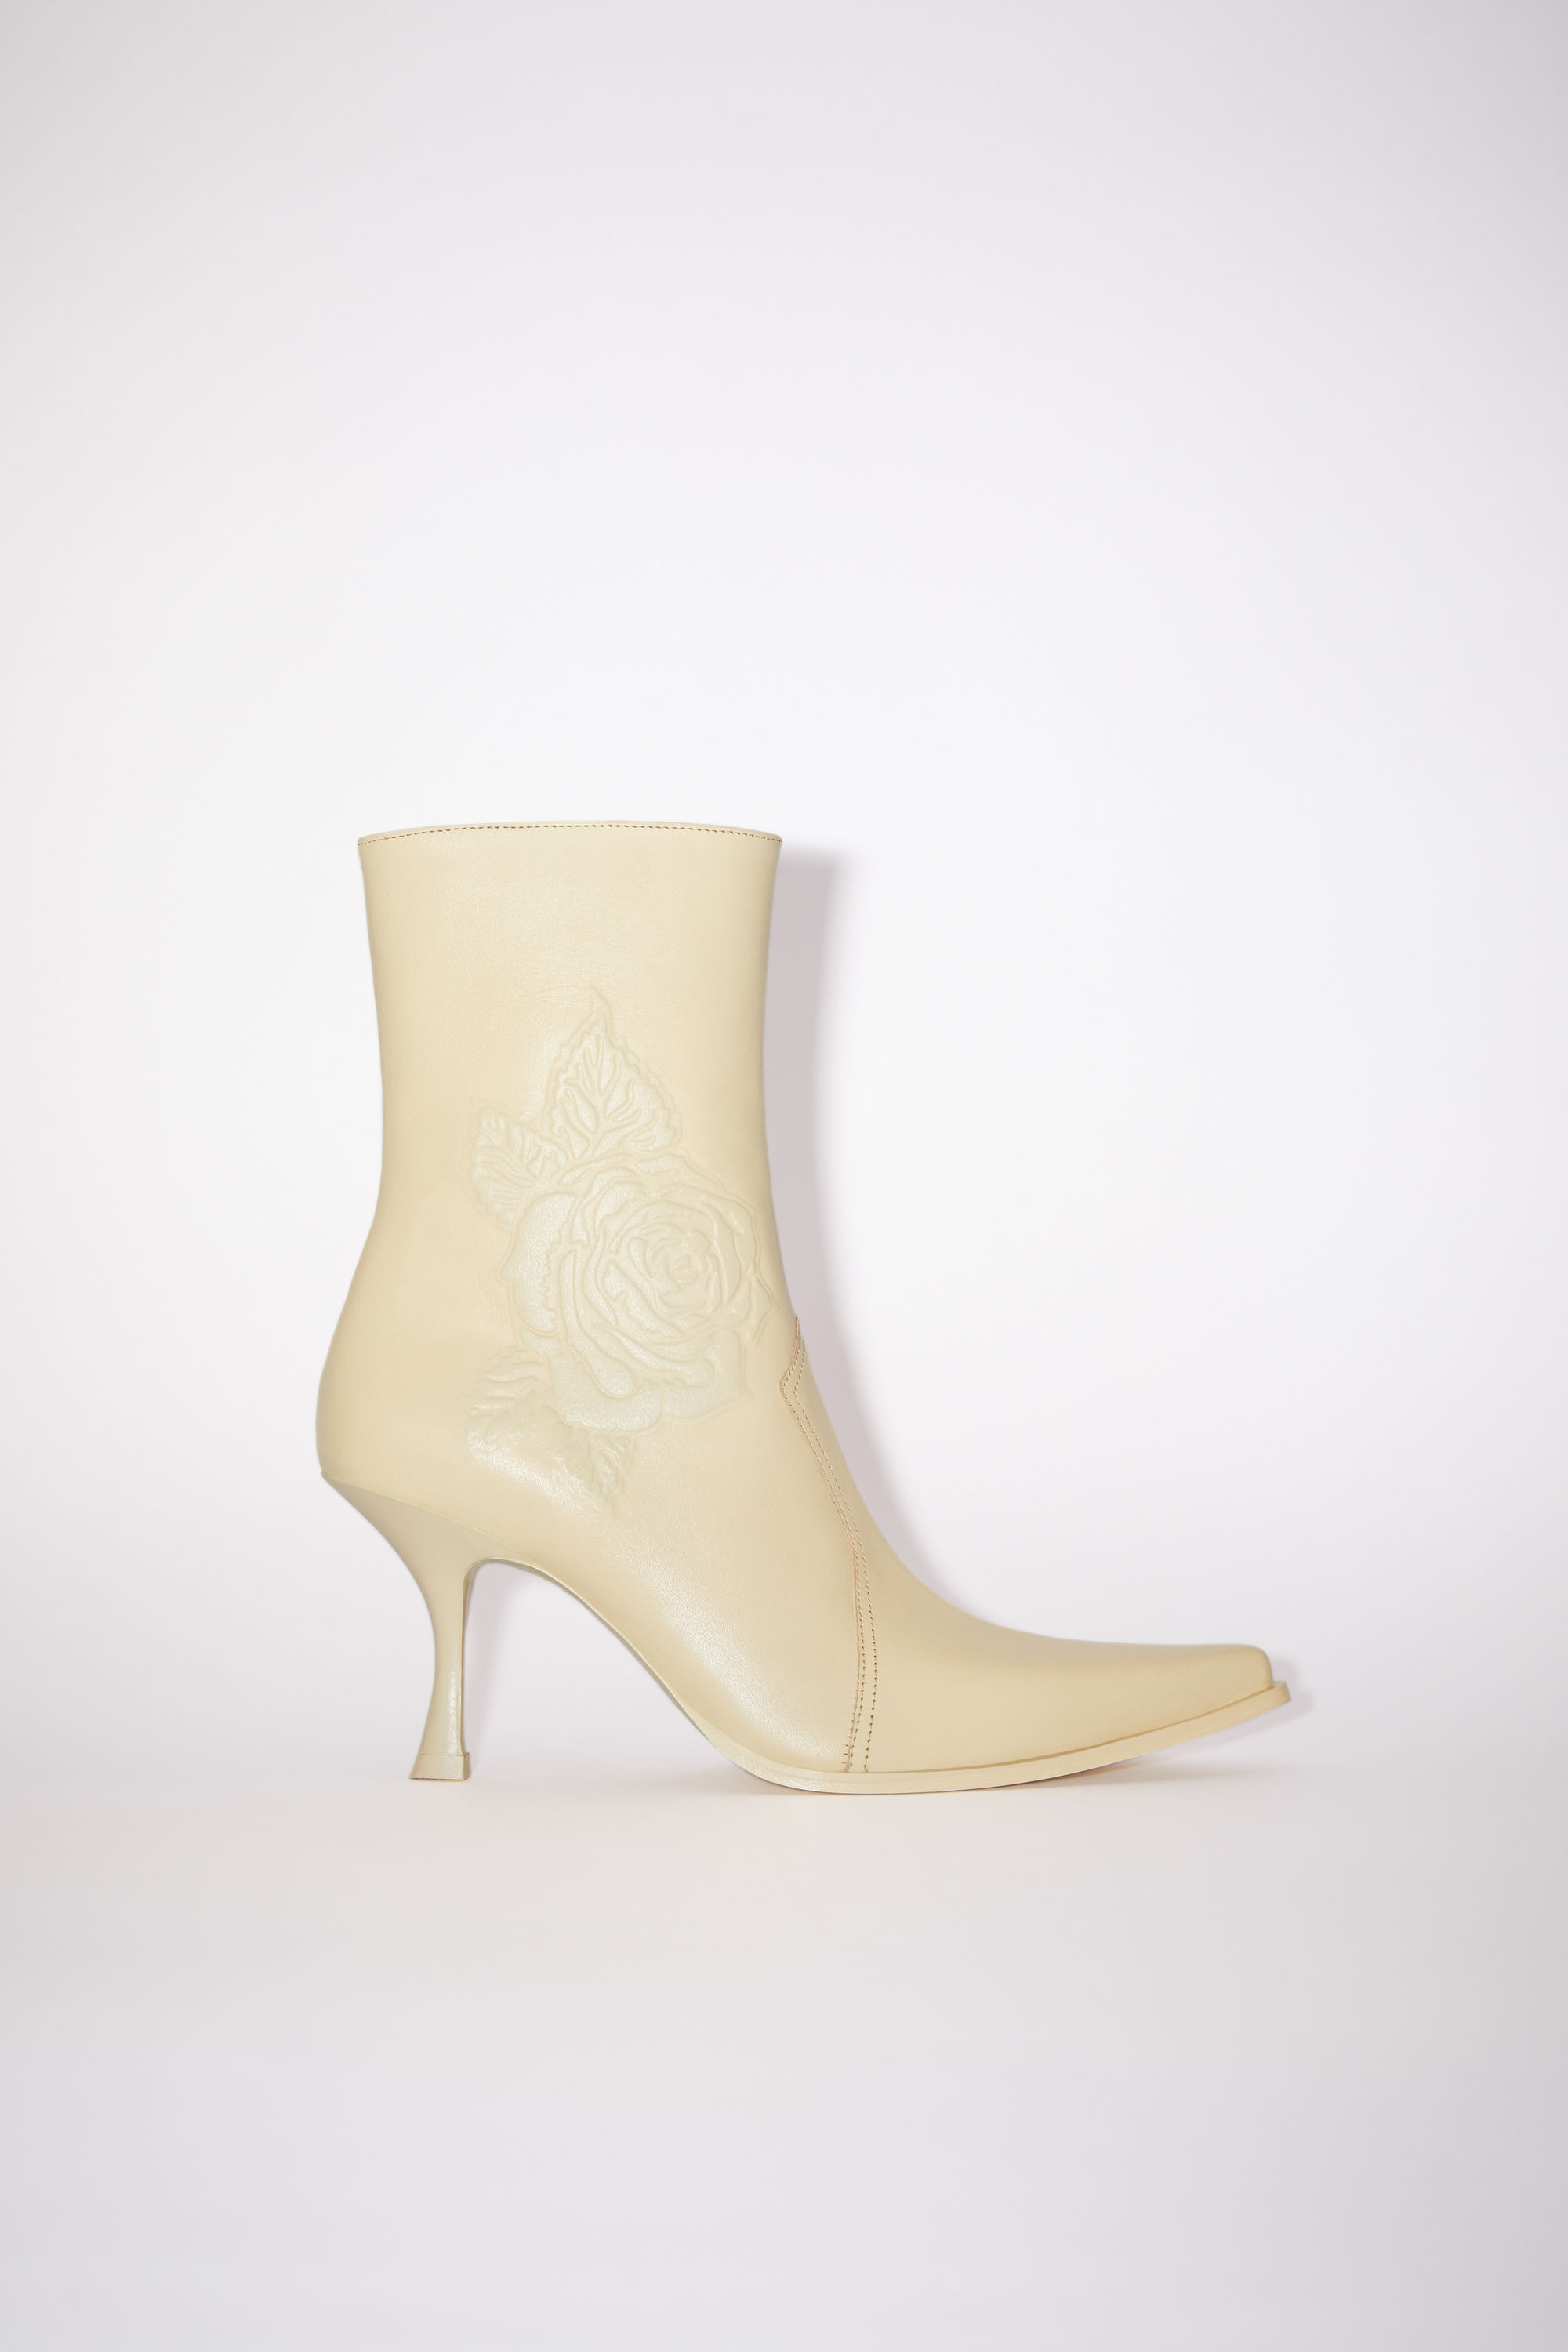 Rio leather ankle boots in beige - Gabriela Hearst | Mytheresa